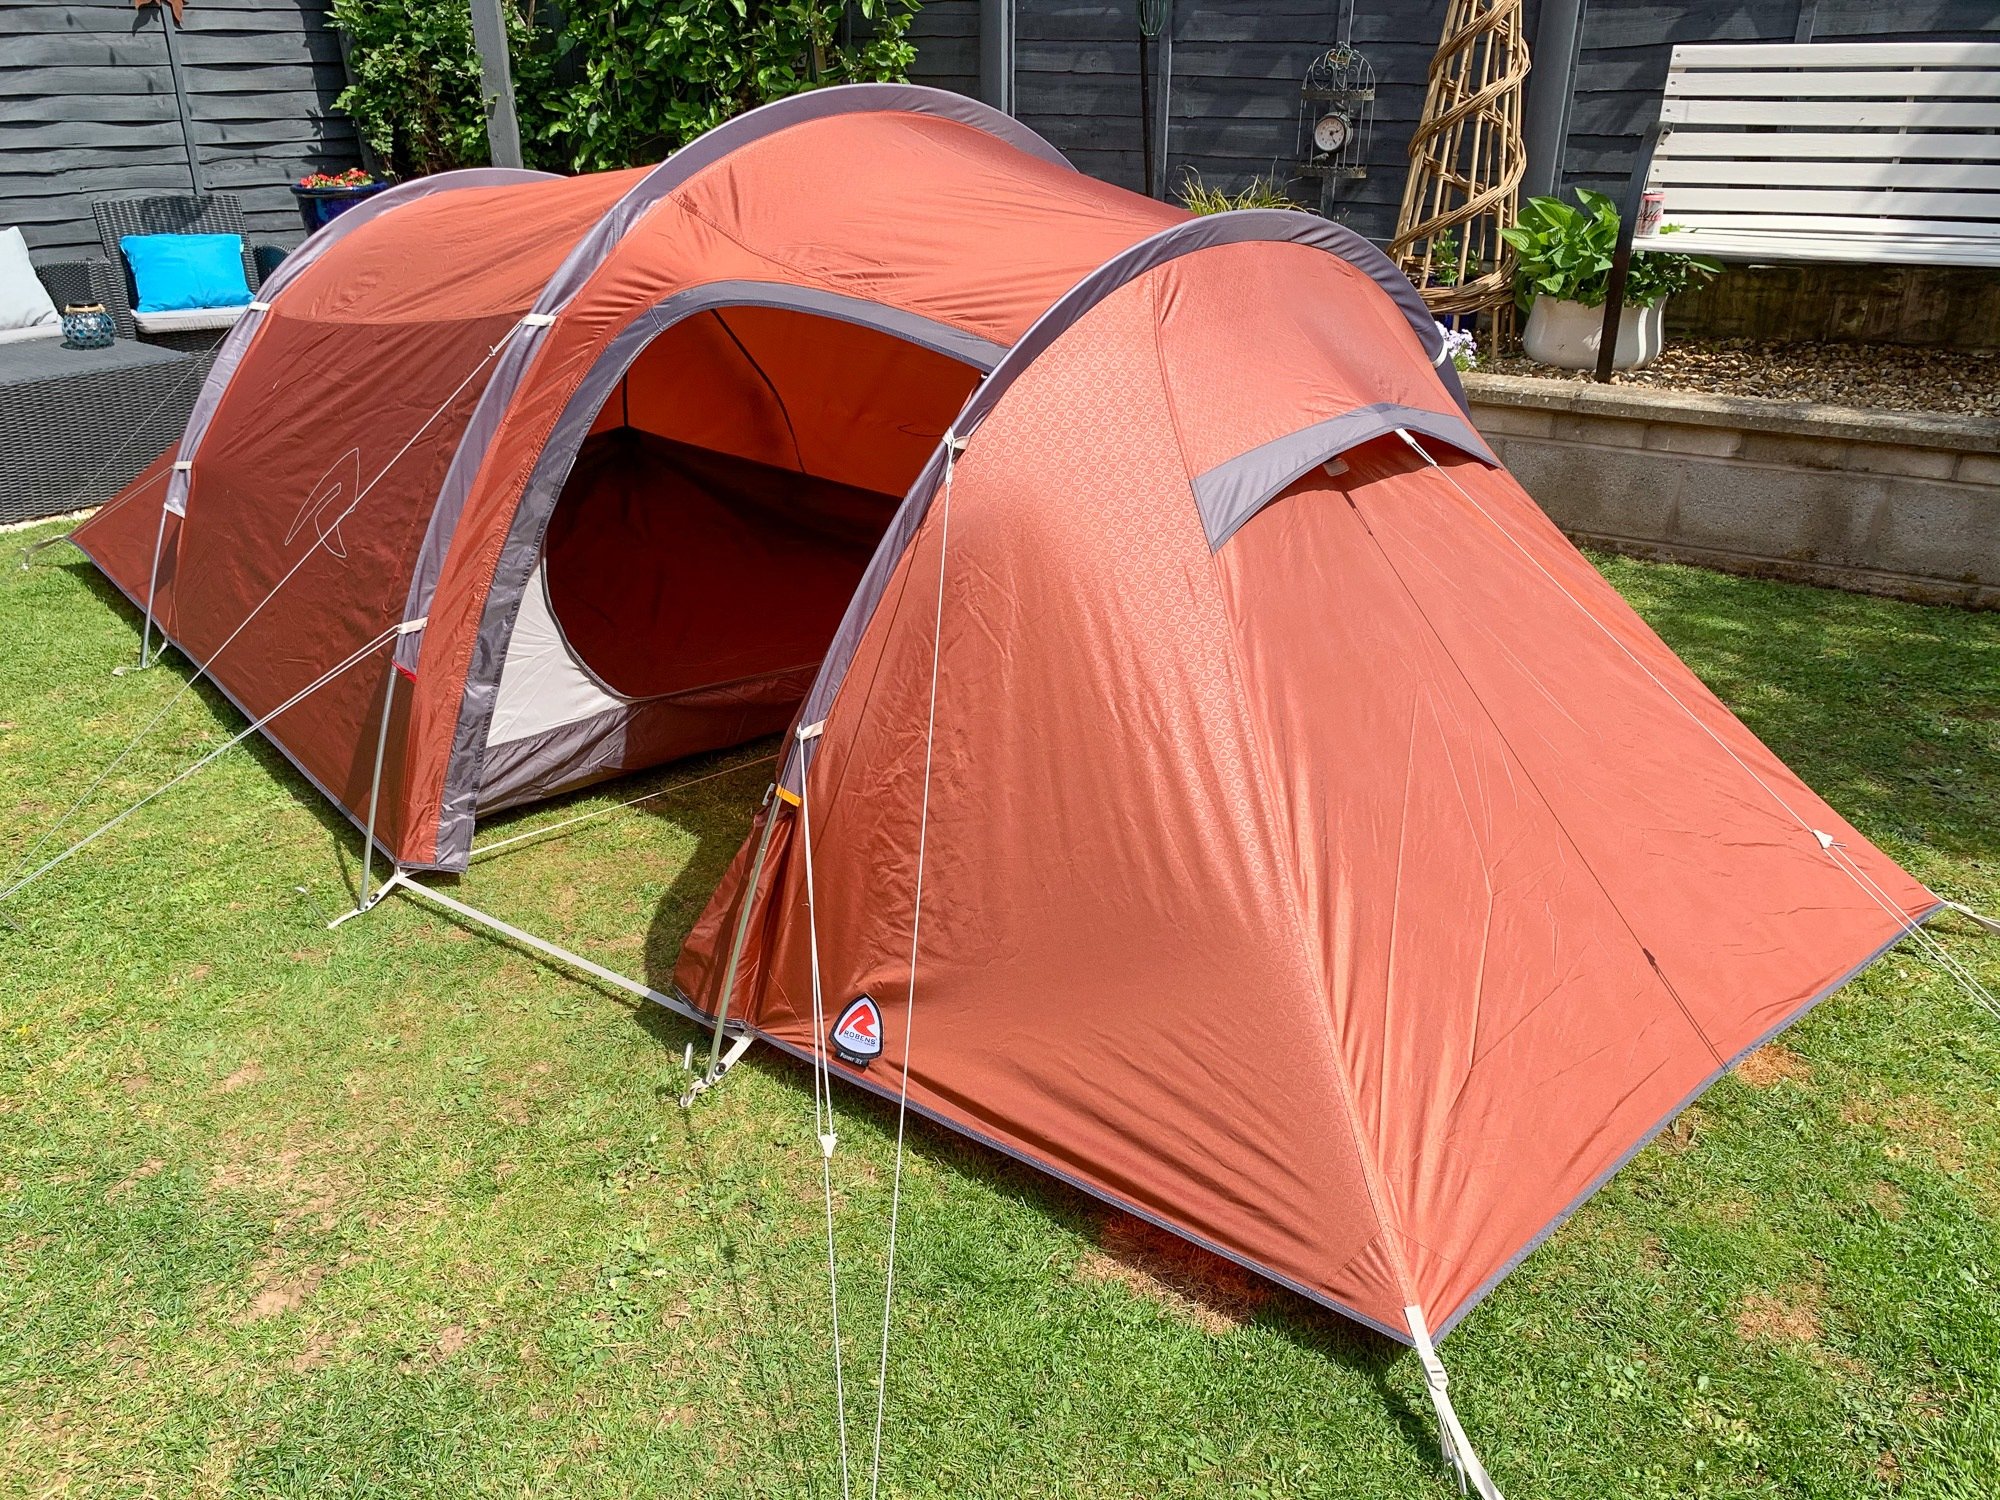 The tent pitched